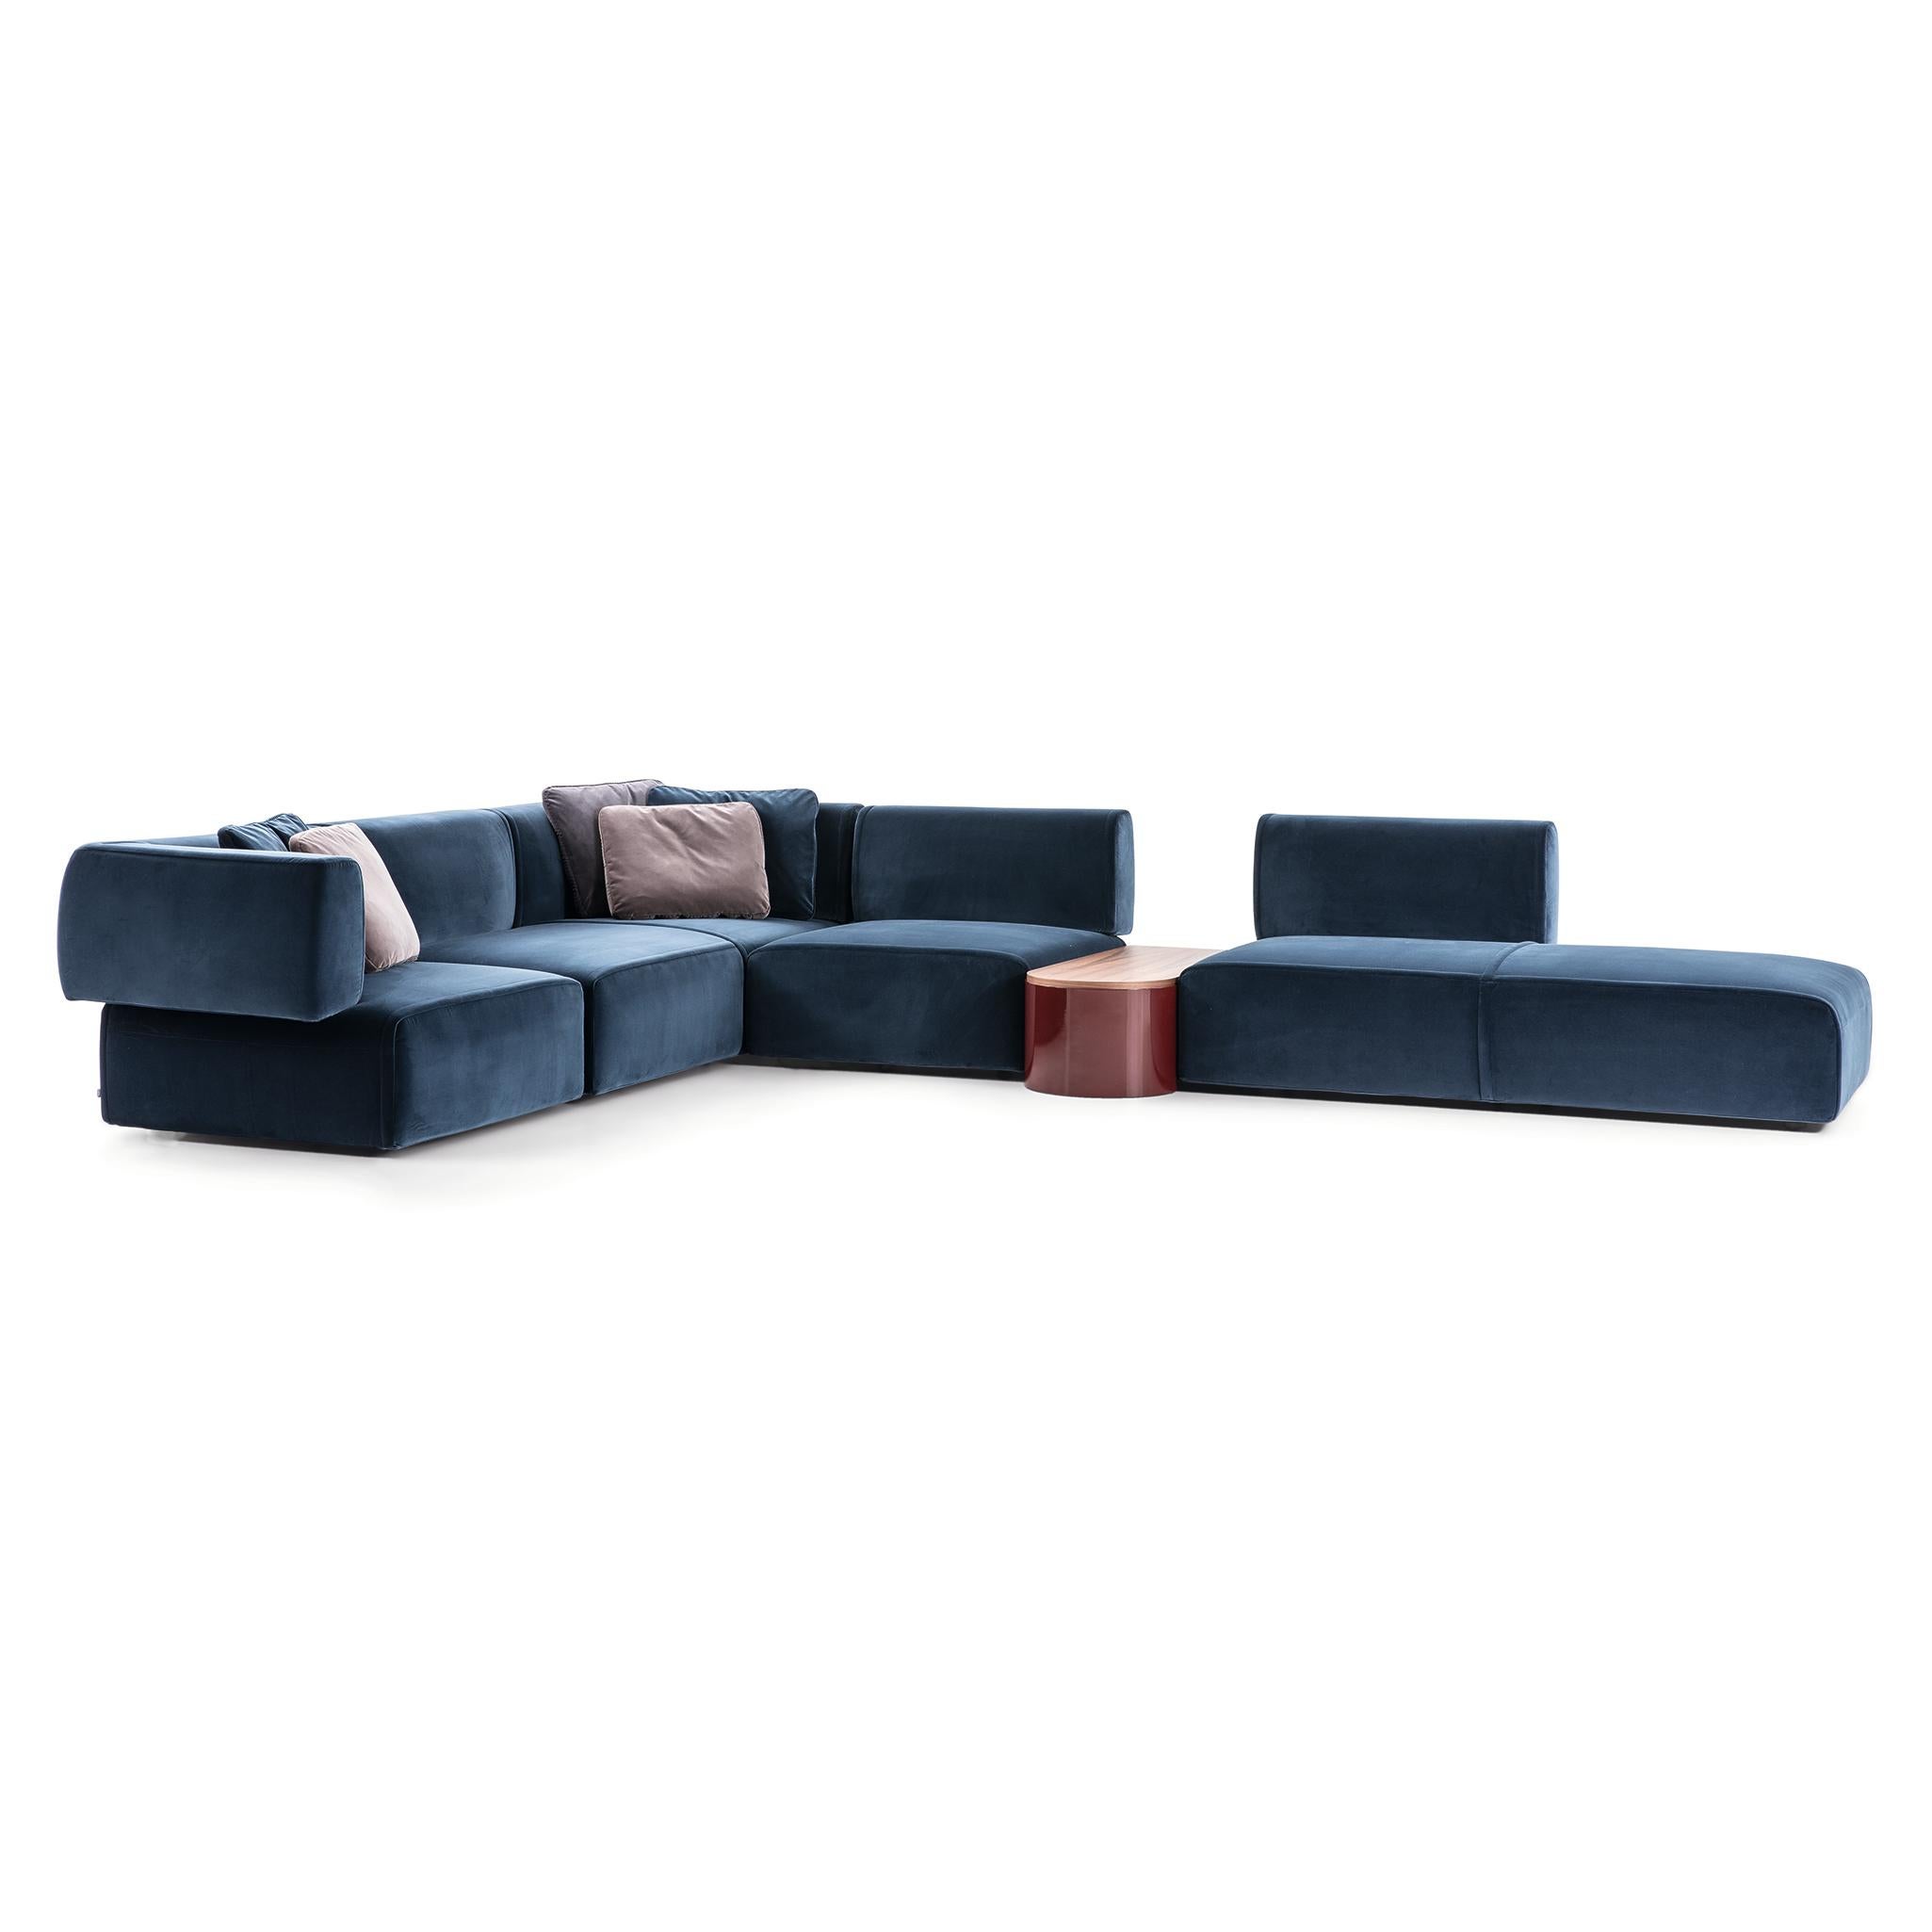 Modular Sofa designed by Patricia Urquiola in 2018. Manufactured by Cassina in Italy.

An inventive modular sofa, with soft, inviting curves that bespeak comfort to the max and extreme versatility. The rounded arm-rests curve to meet the back, the